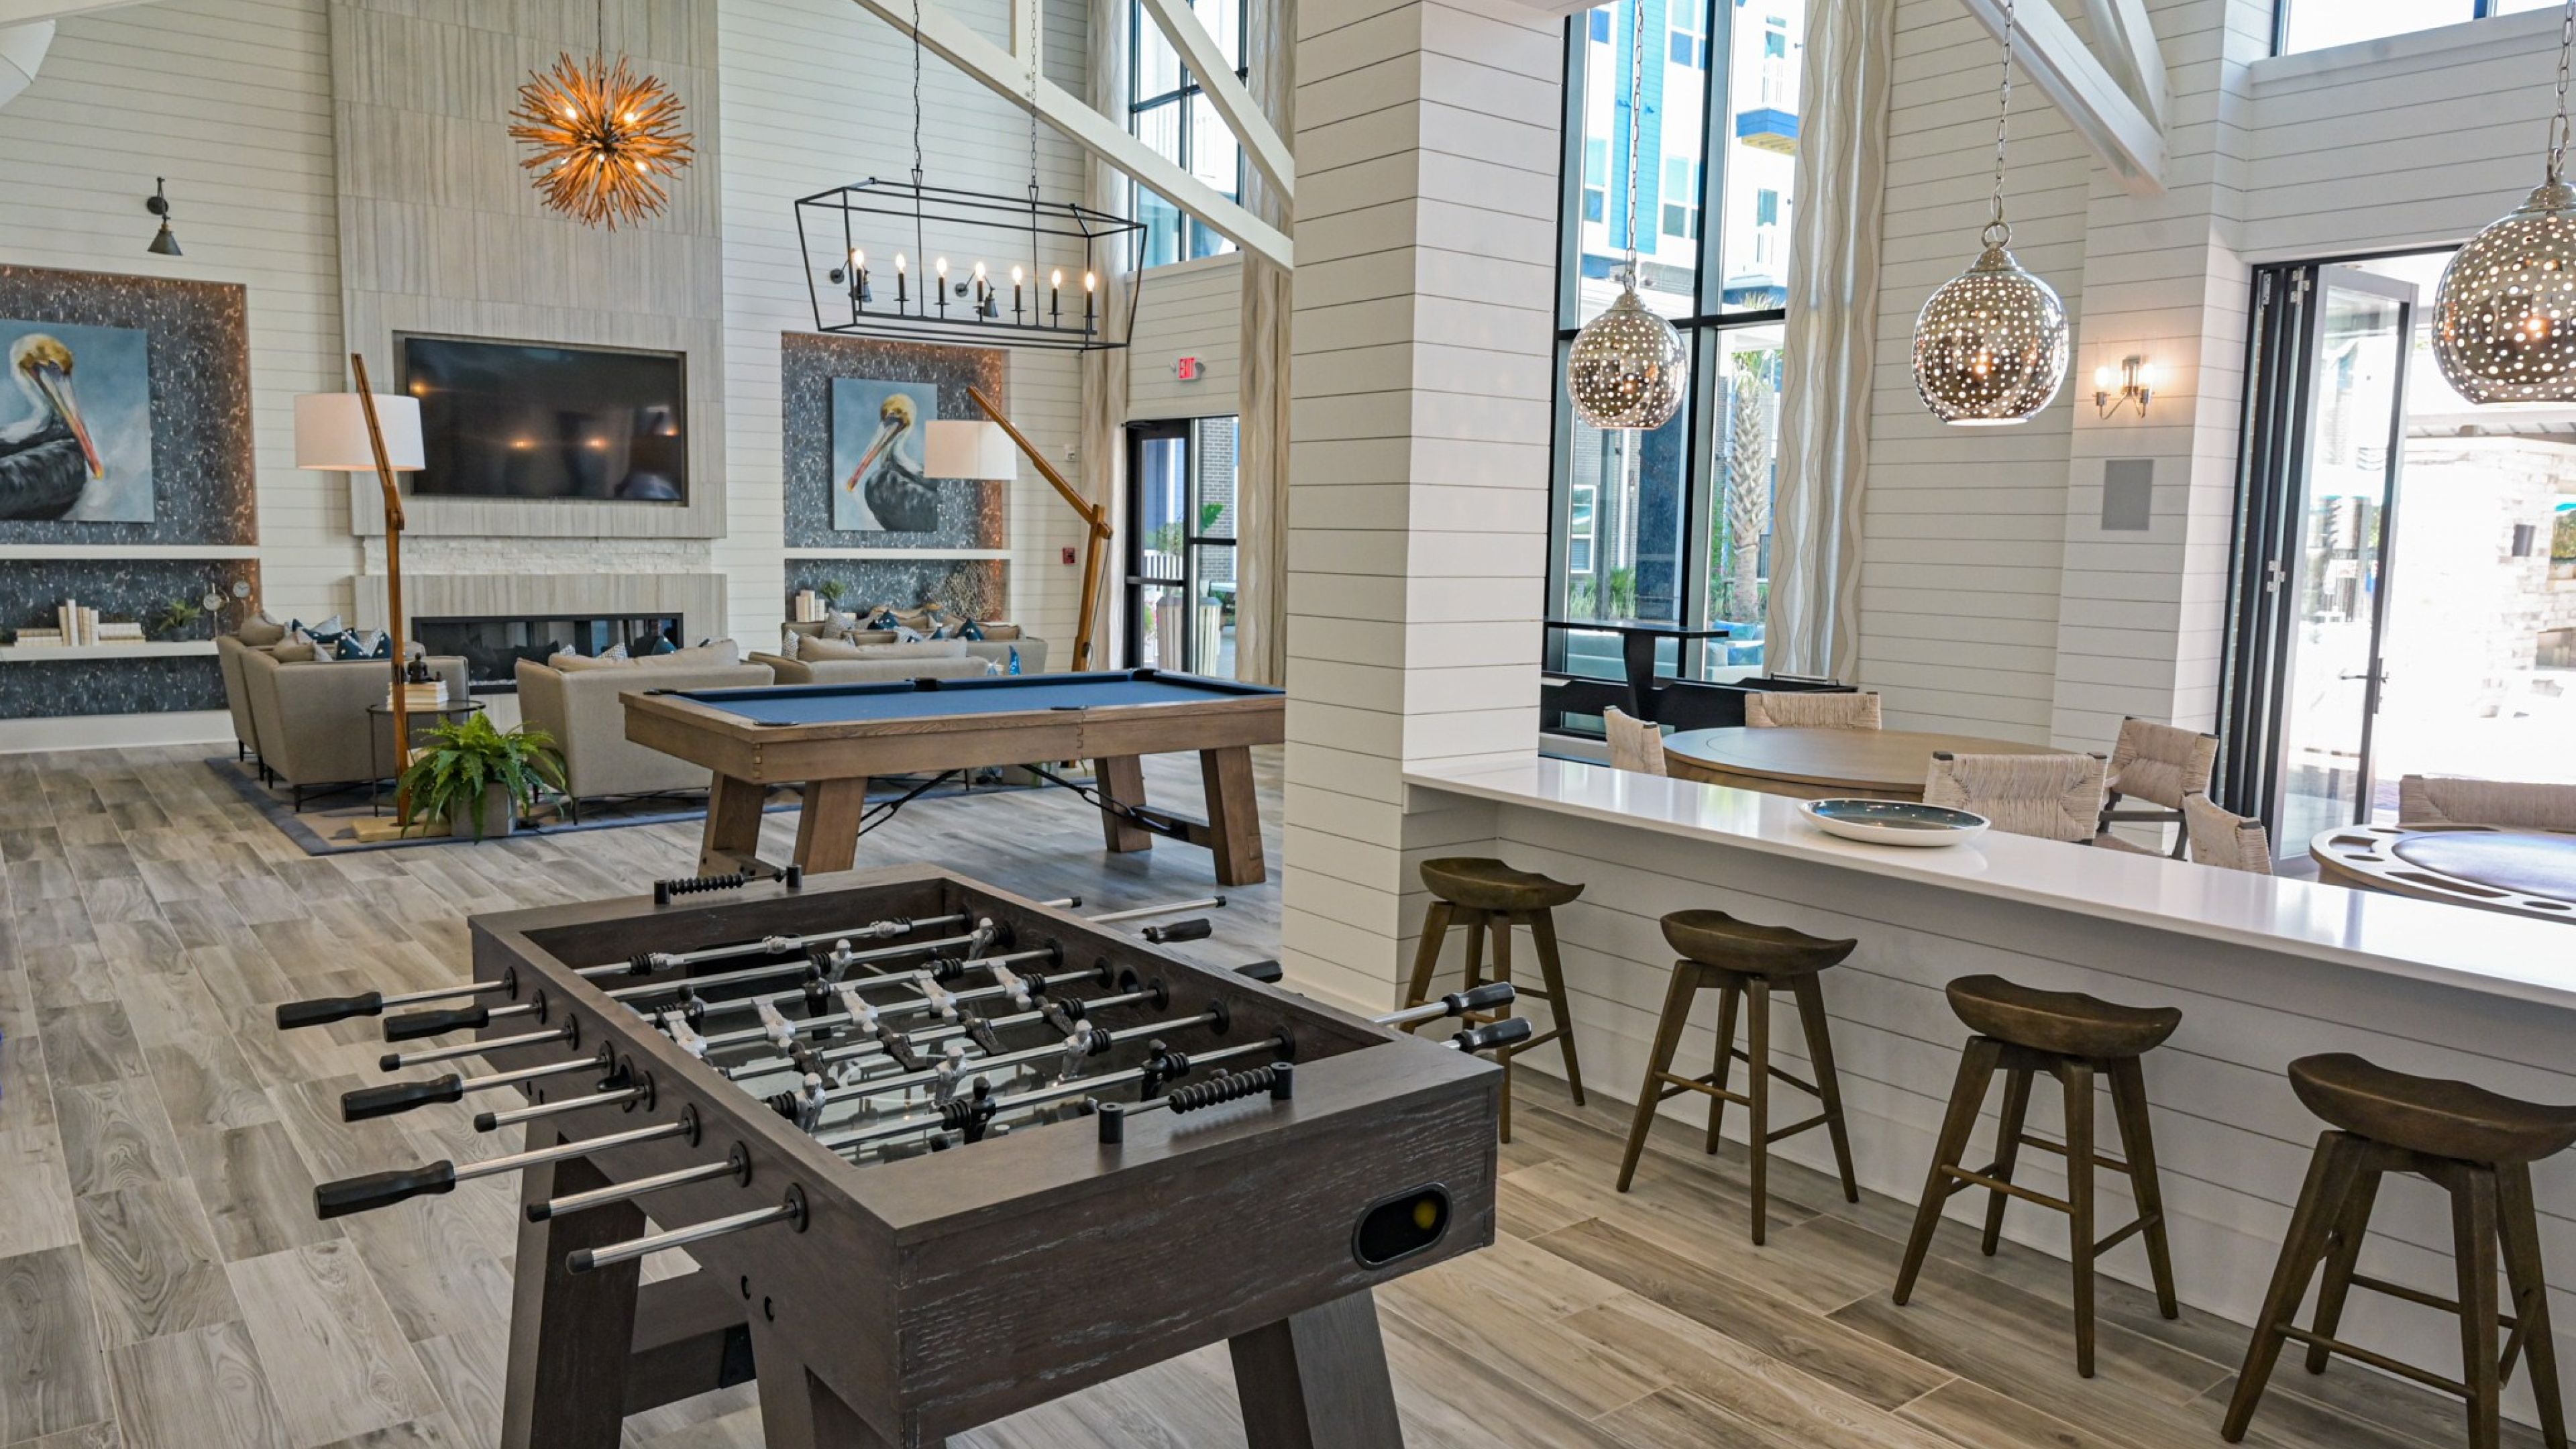 Hawthorne at Indy West resident clubhouse with pool table, foosball table, and entertainment space